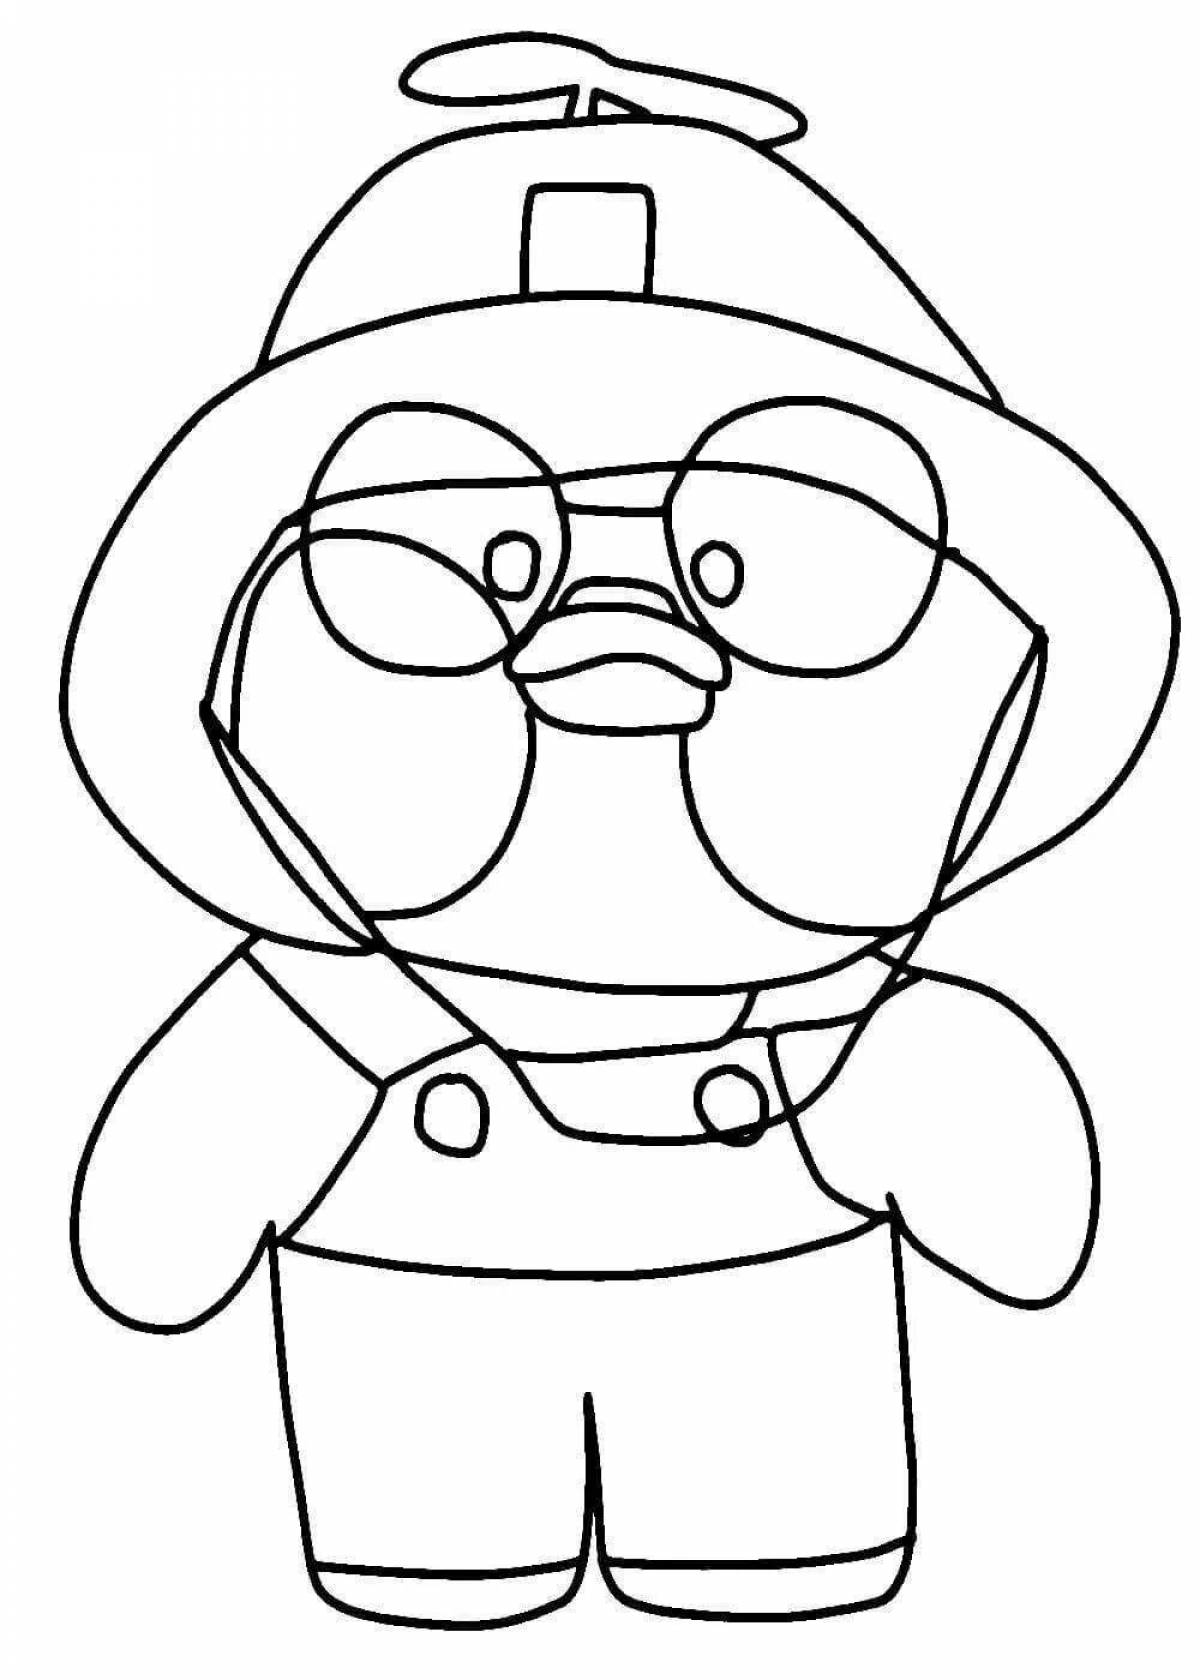 Cute duck coloring page